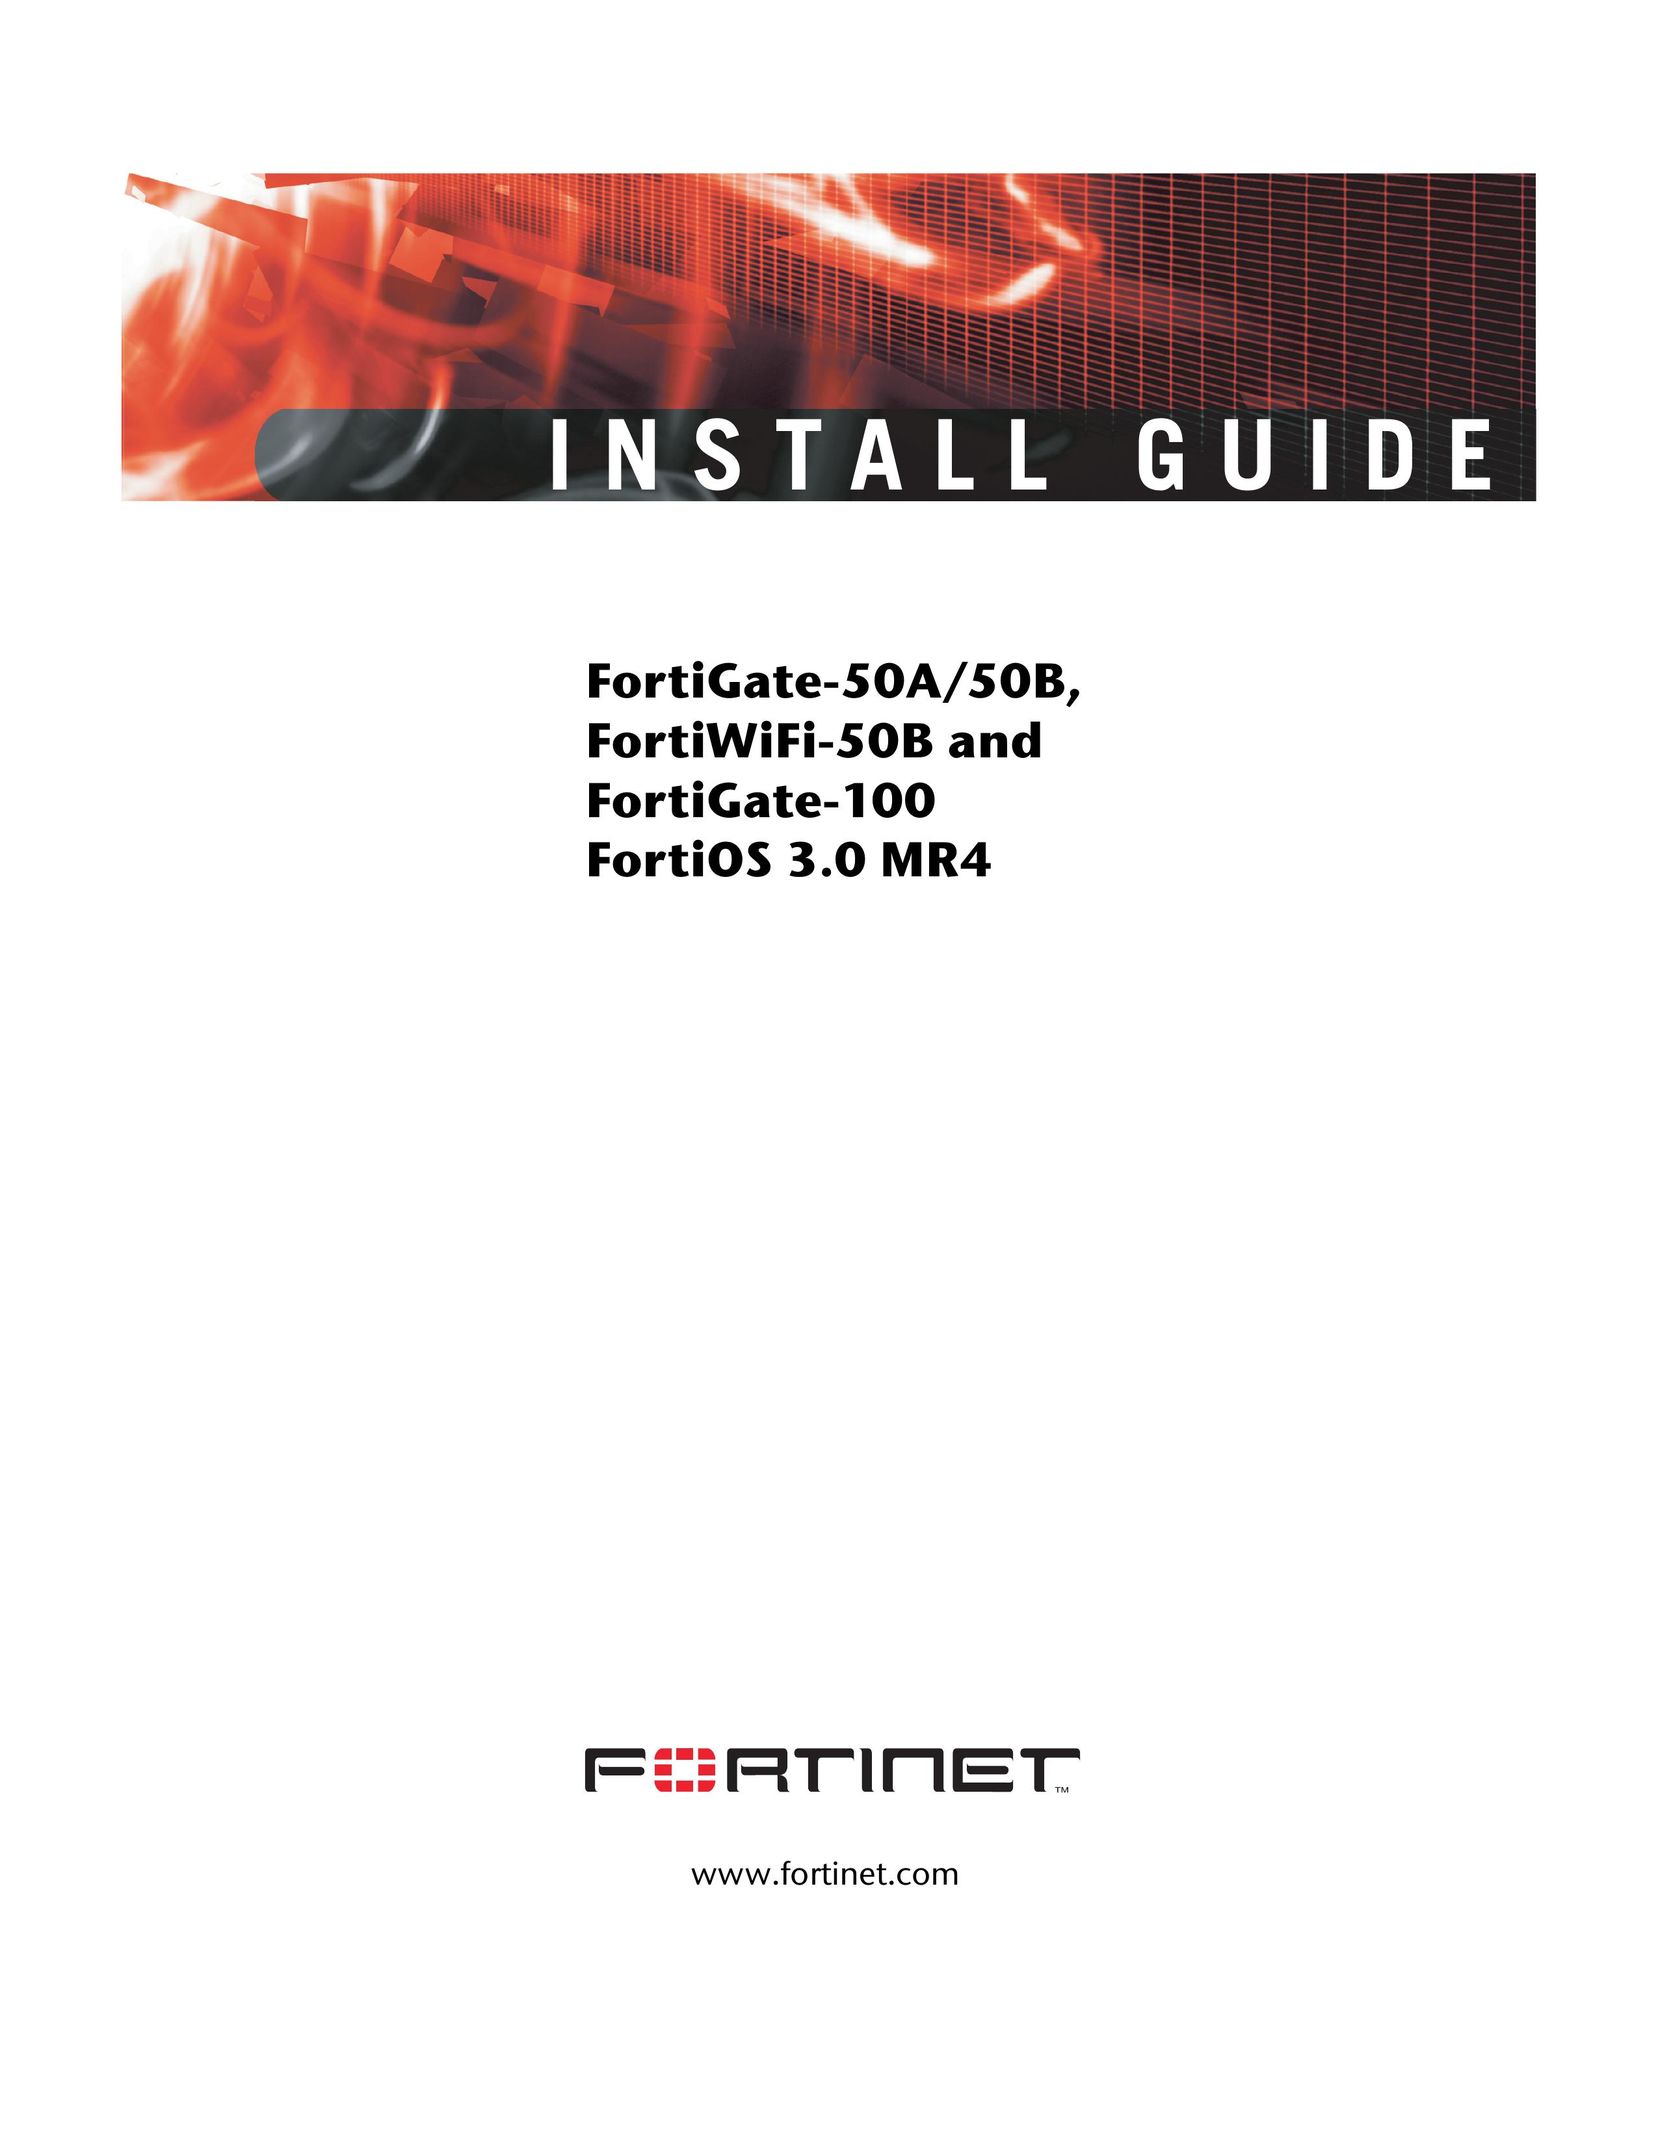 Fortinet 100 Network Router User Manual